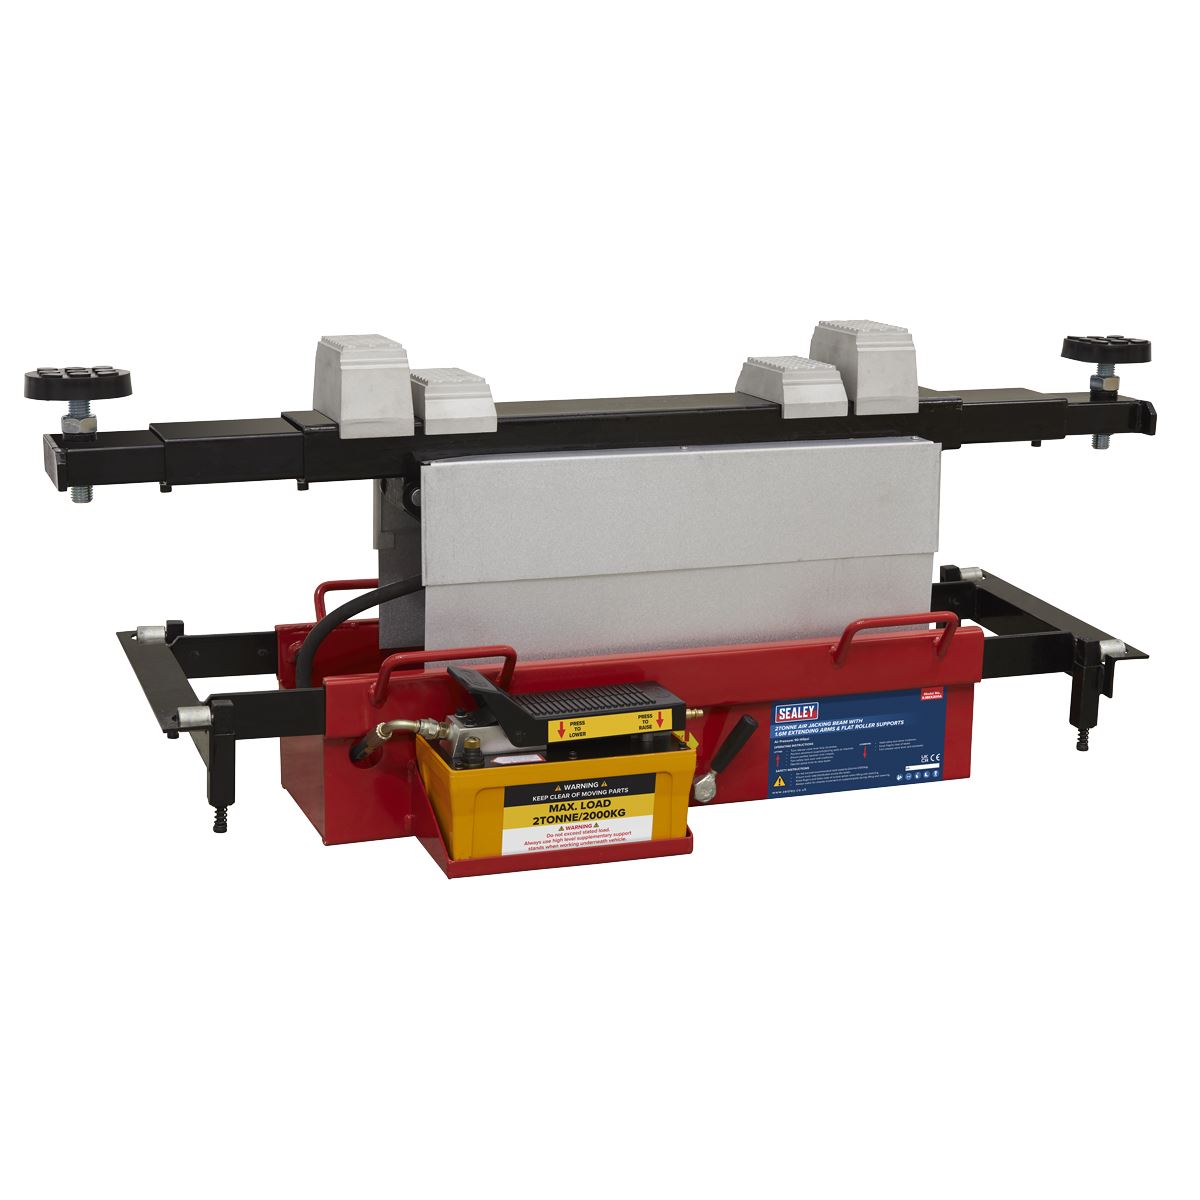 Sealey Air Jacking Beam 2 Tonne with Arm Extenders & Flat Roller Supports